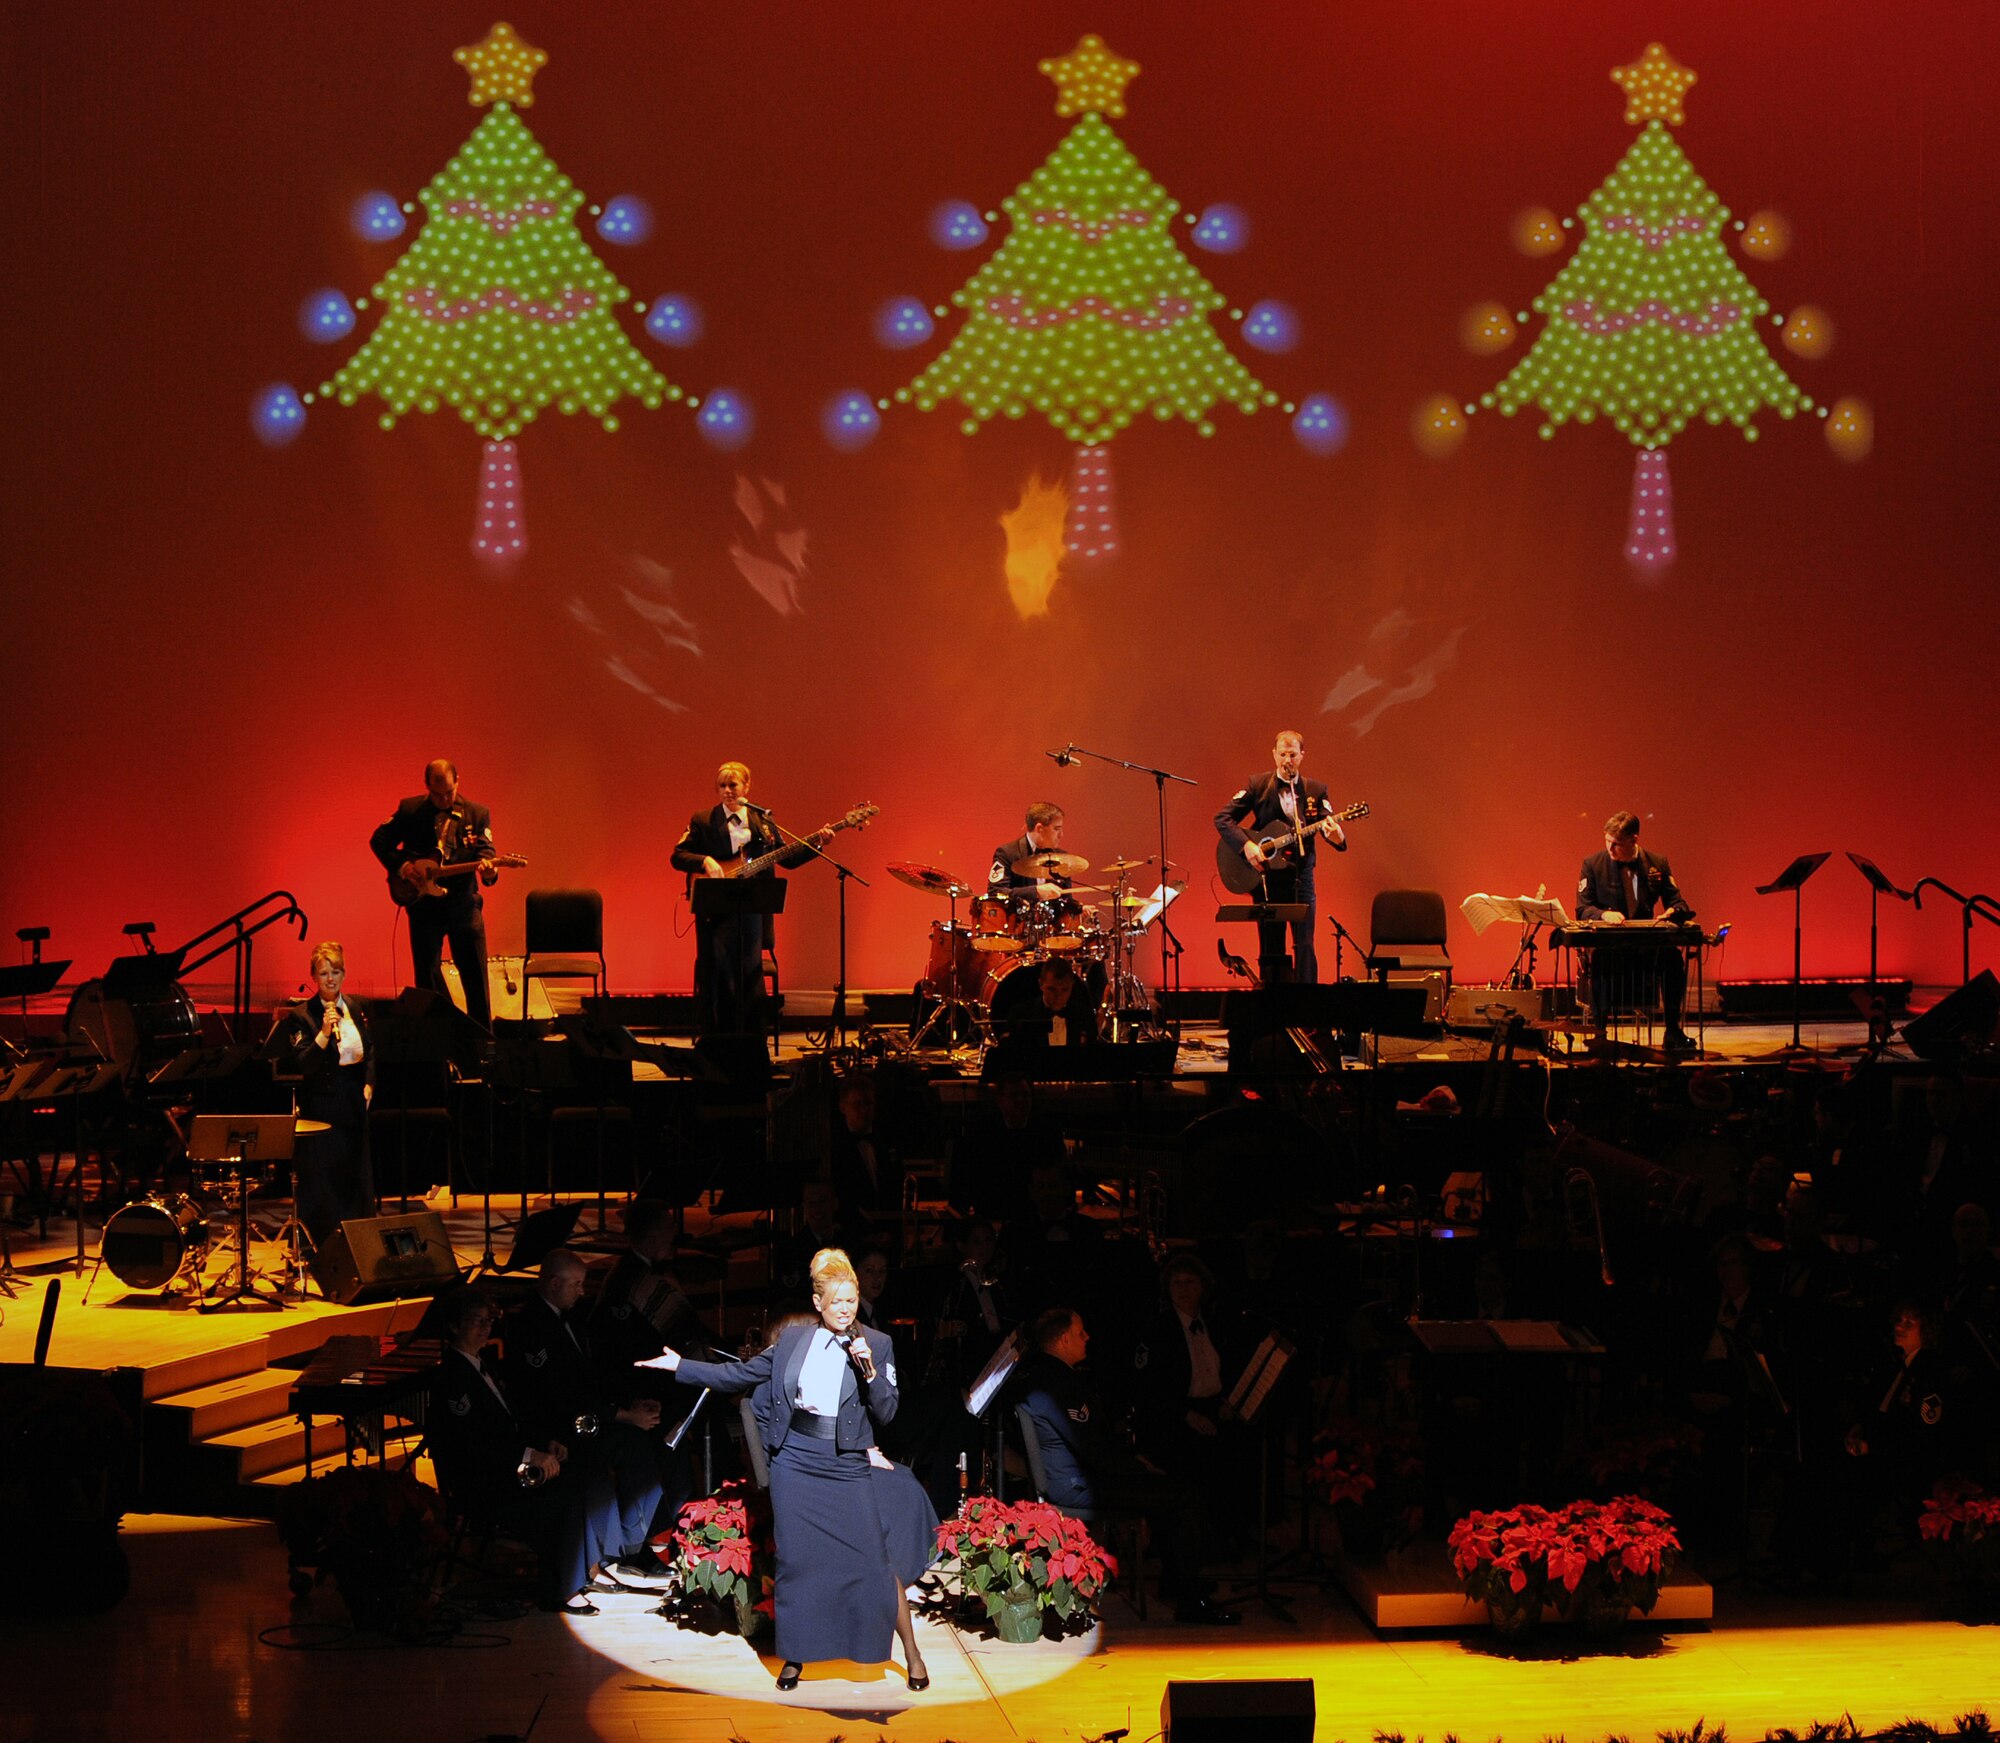 TSgt Lara Murdzia from the Heartland of America Band sings during "The Promise of the Season" holiday concert at the Holland Performing Arts Center Dec. 11. A special concert was performed for children from area schools. (U.S. Air Force Photo By Jeff Gates)